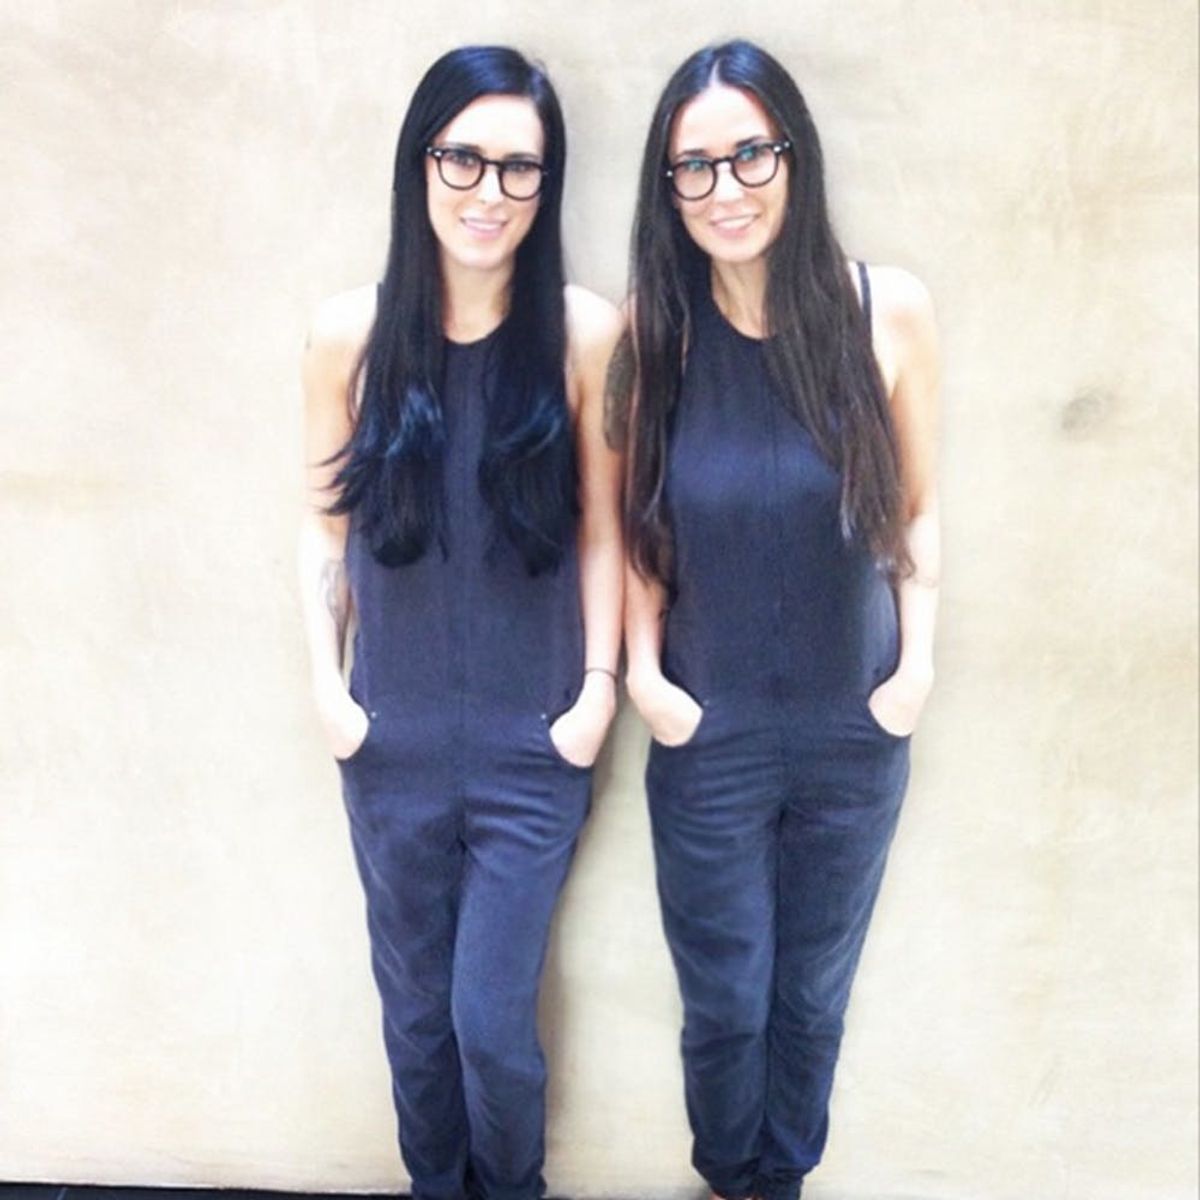 5 Celeb Mother-Daughter Duos Twinning Even Harder Than Demi Moore and Rumer Willis